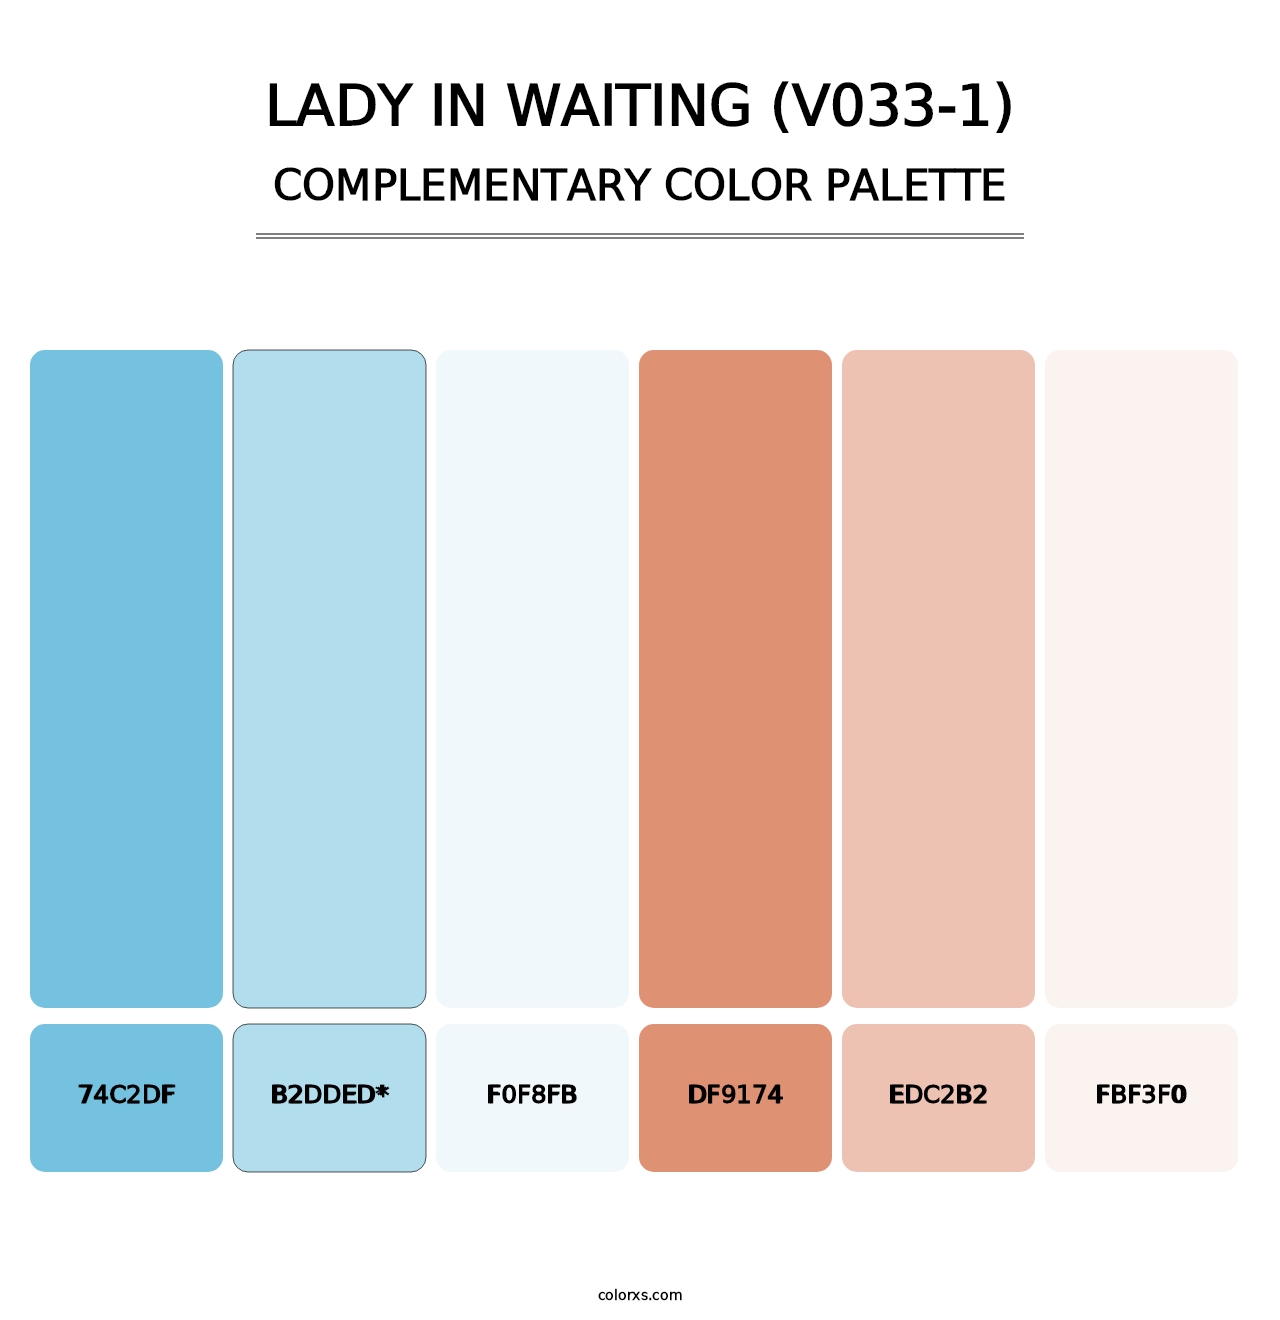 Lady in Waiting (V033-1) - Complementary Color Palette